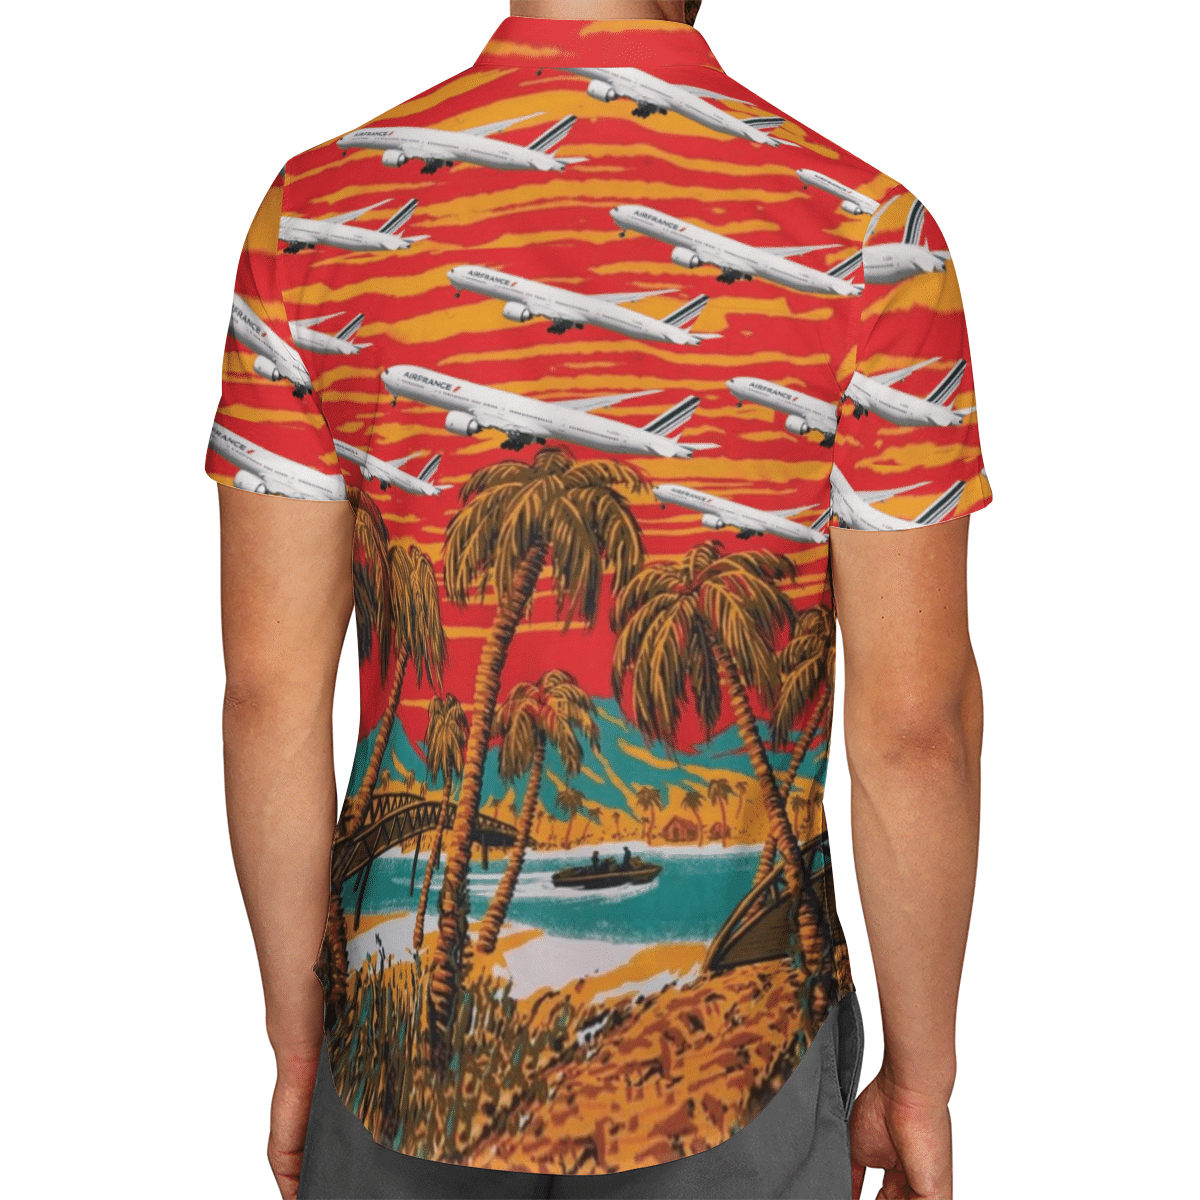 Going to the beach with a quality shirt 181